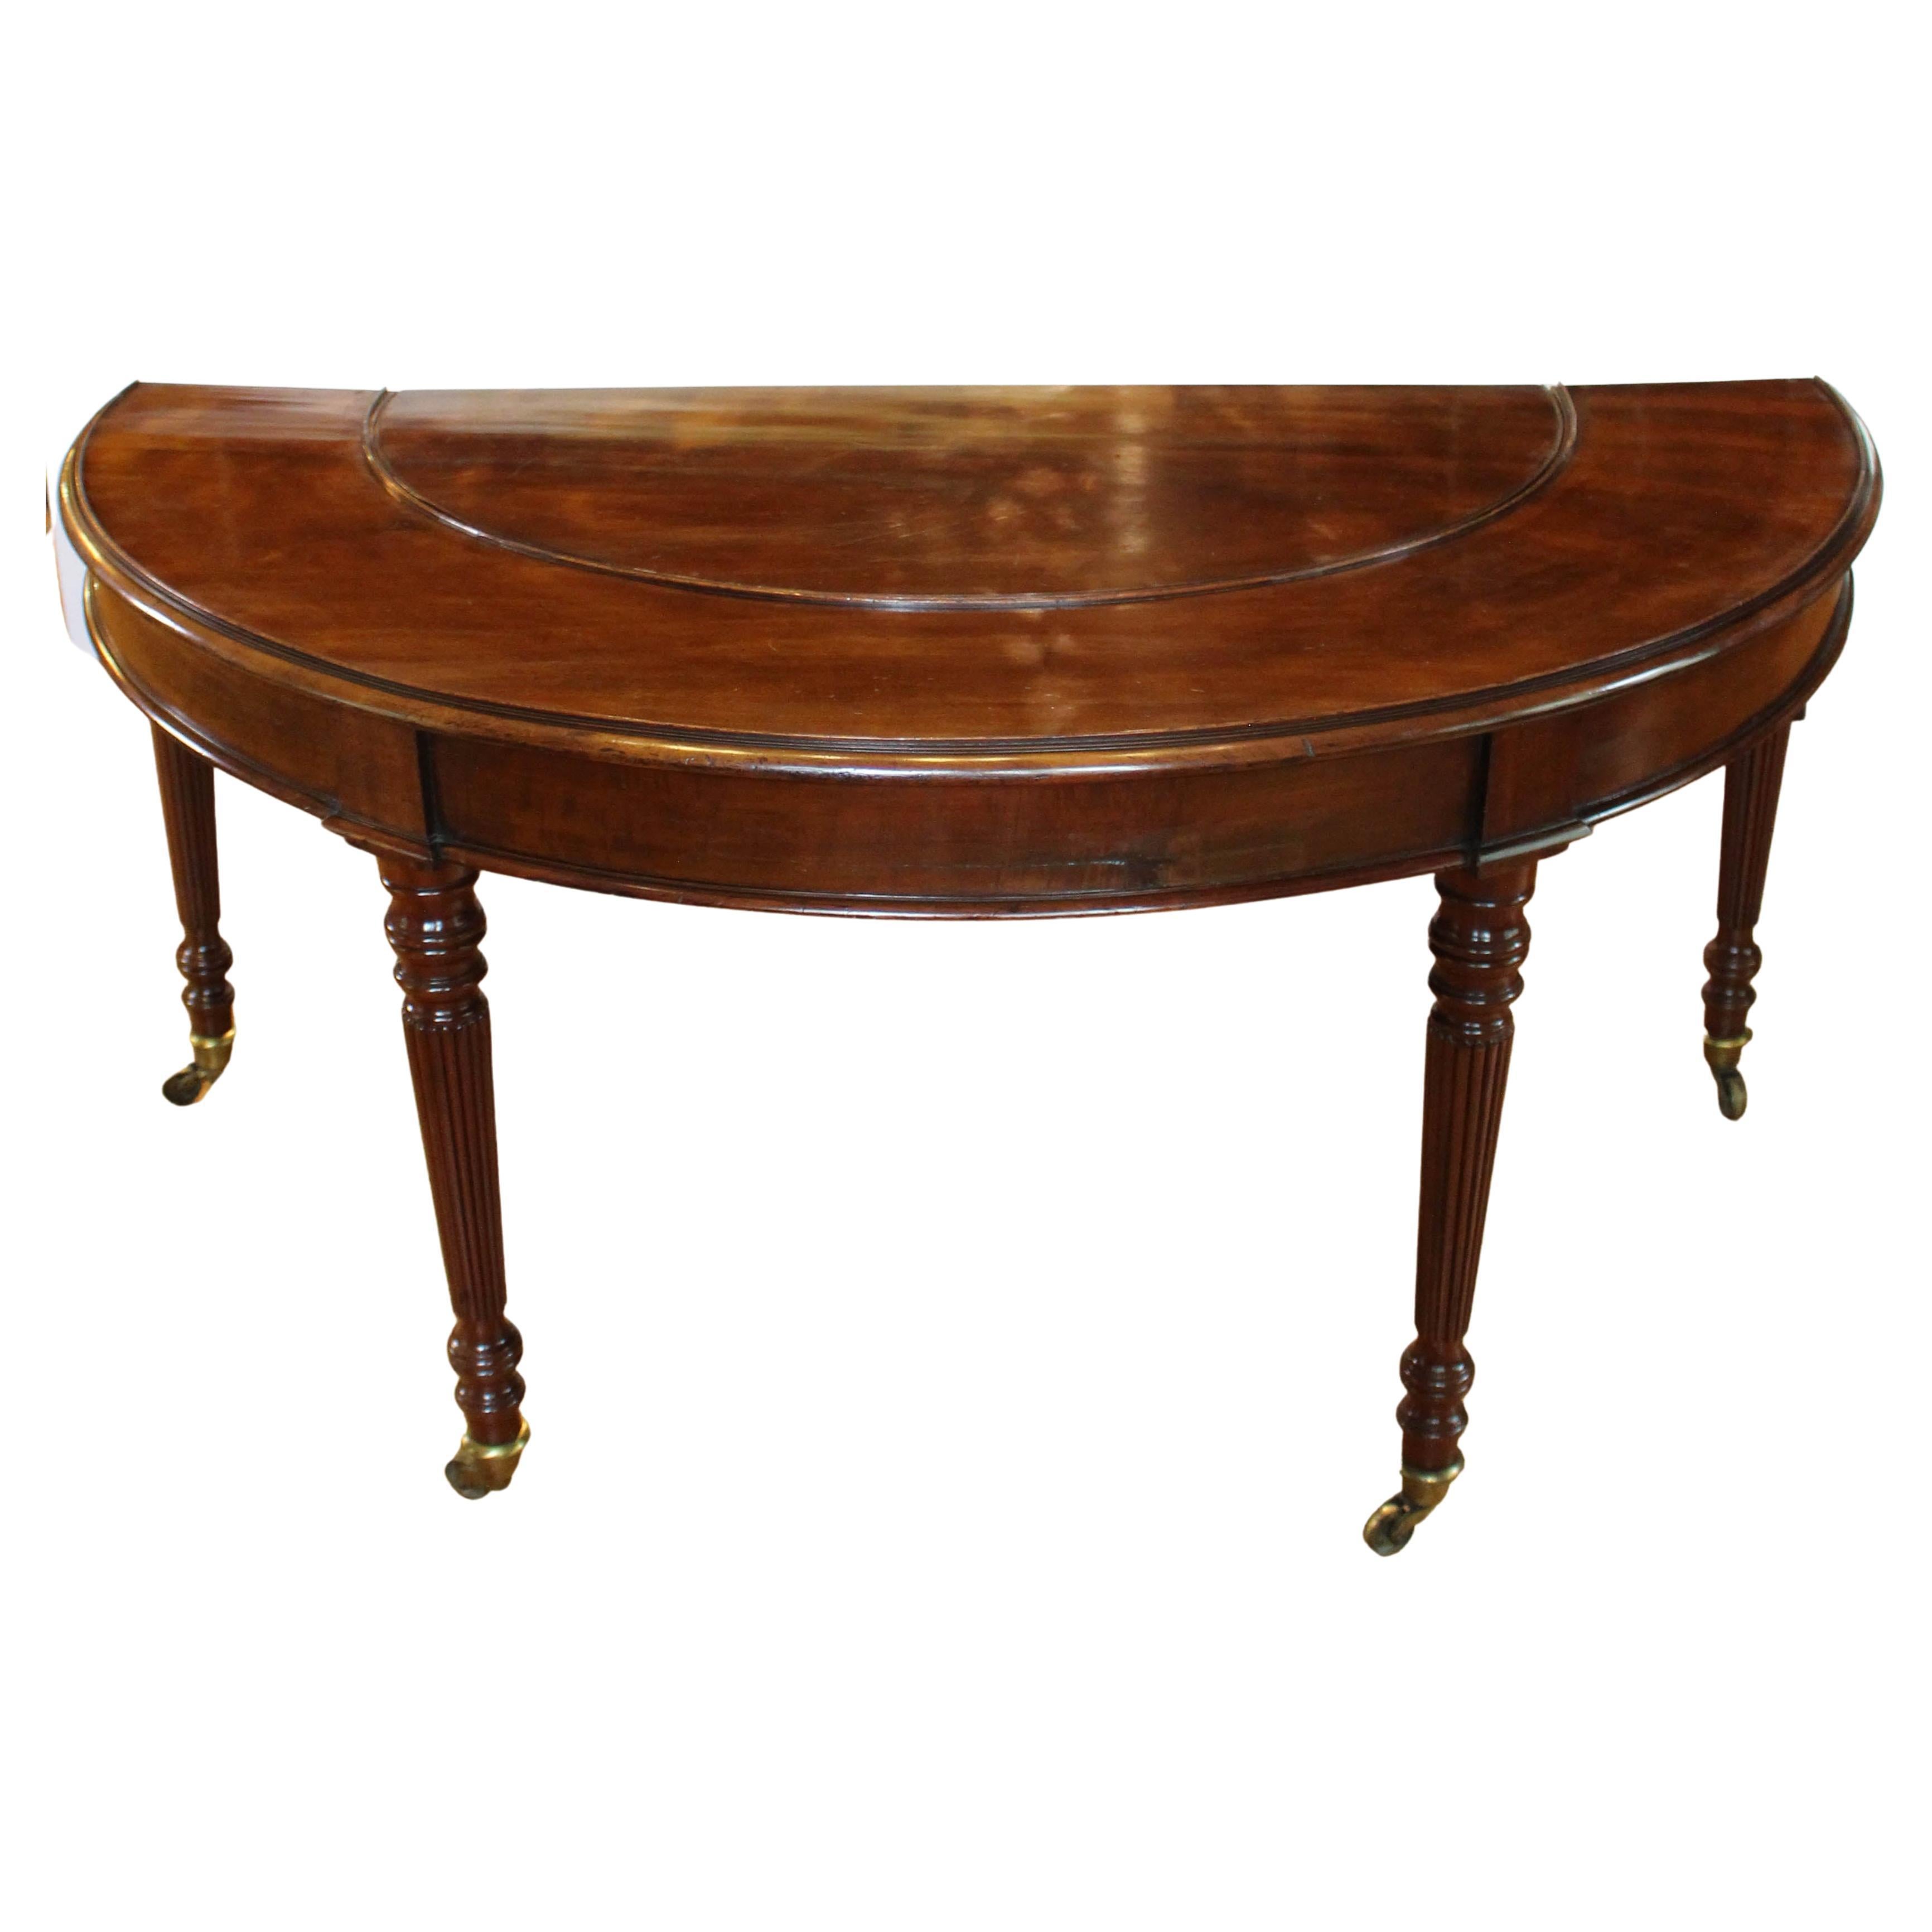 Circa 1825 Rare Form English Drinking Table For Sale